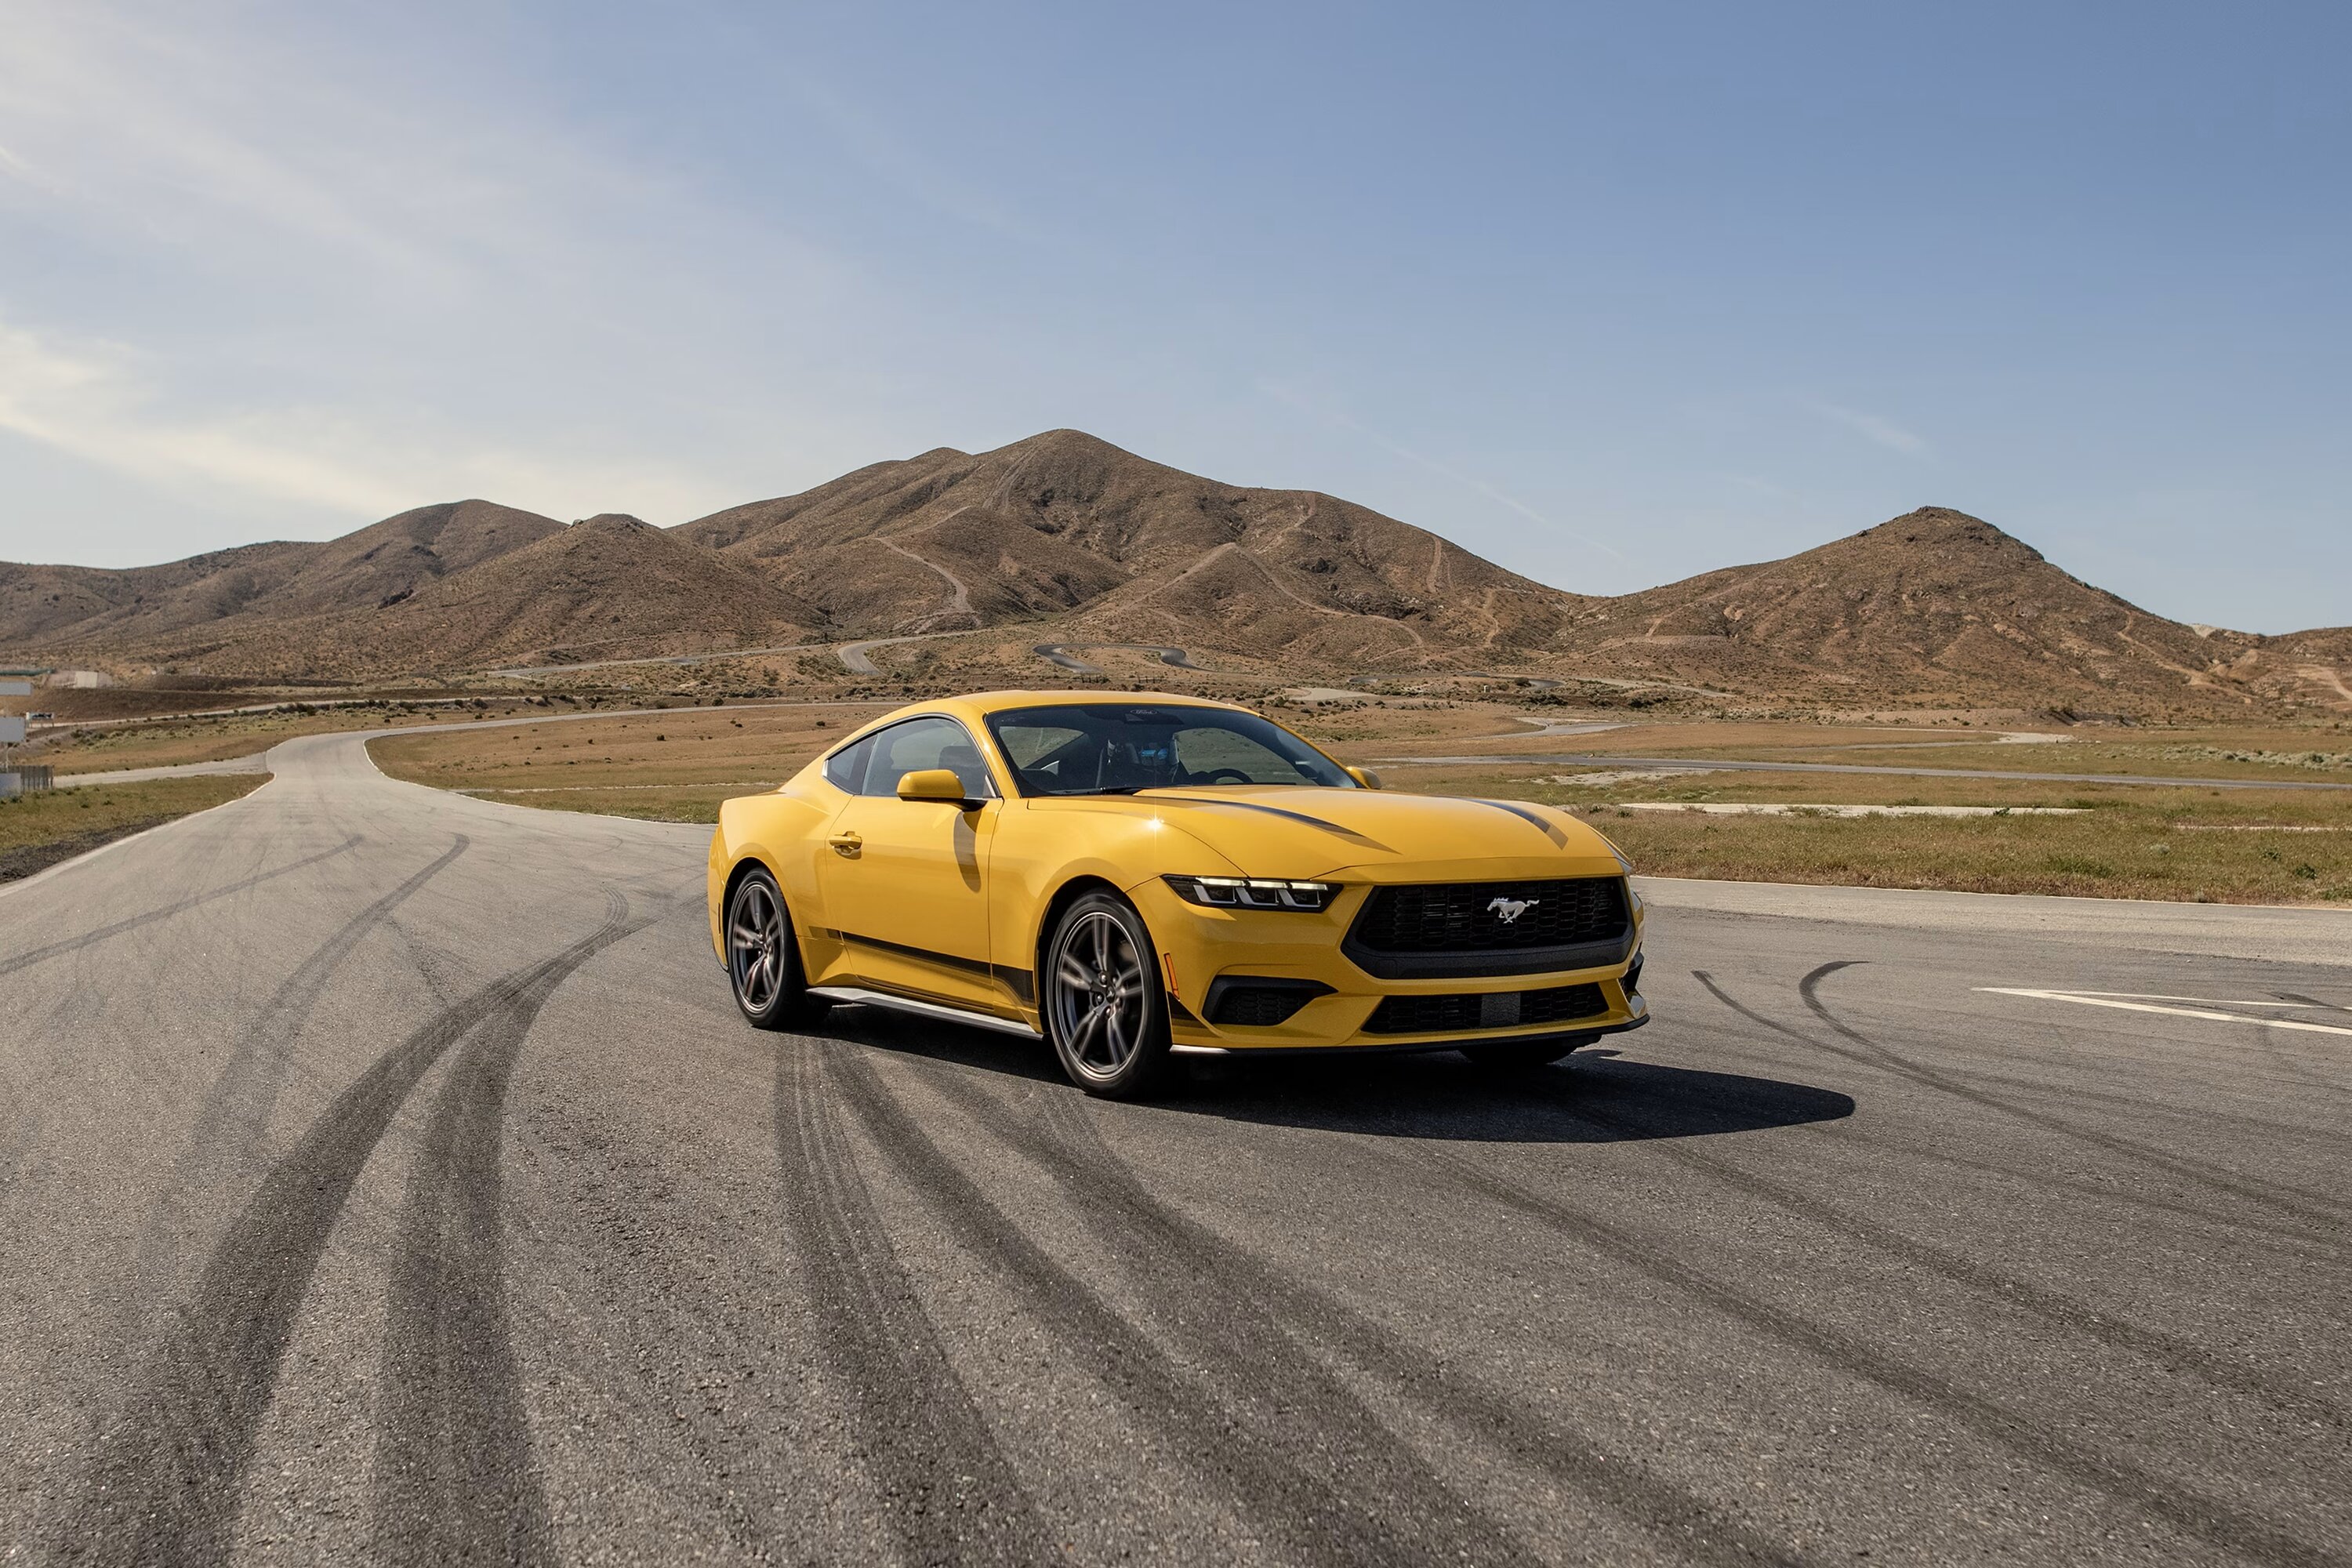 S650 Mustang Official YELLOW SPLASH Mustang S650 Thread 24_FRD_MST_61047